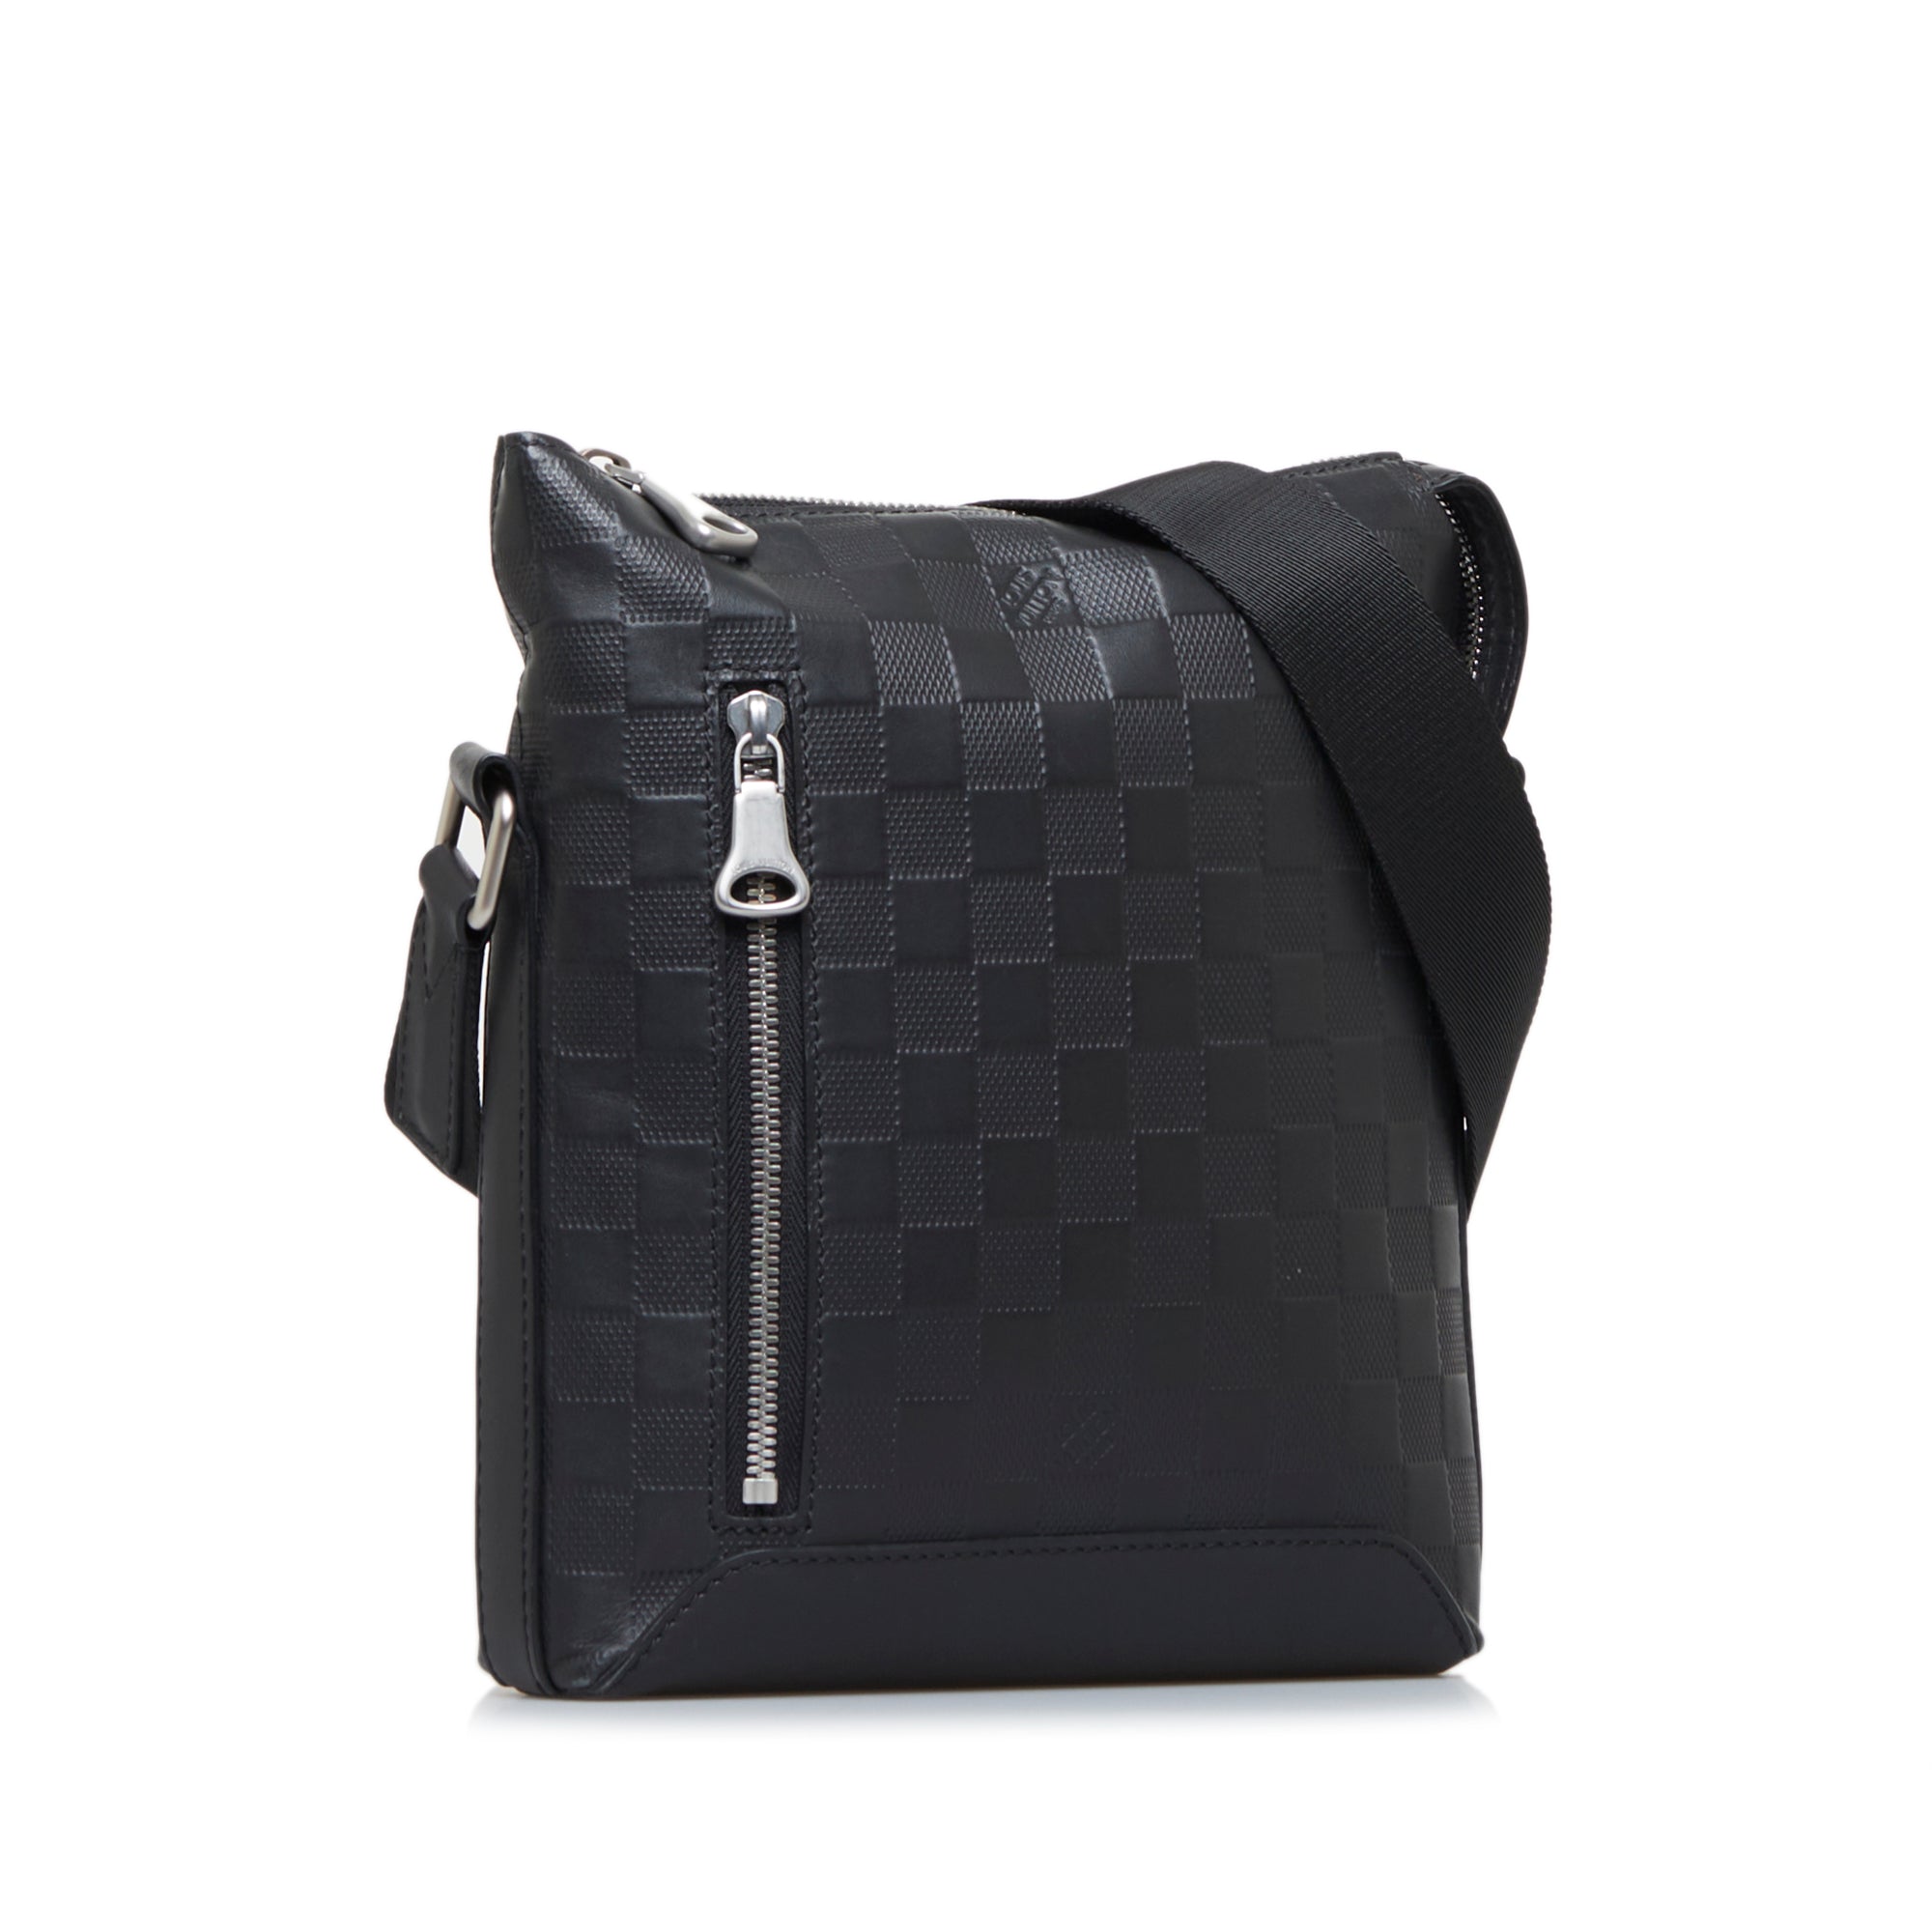 Products By Louis Vuitton : Discovery Messenger Pm